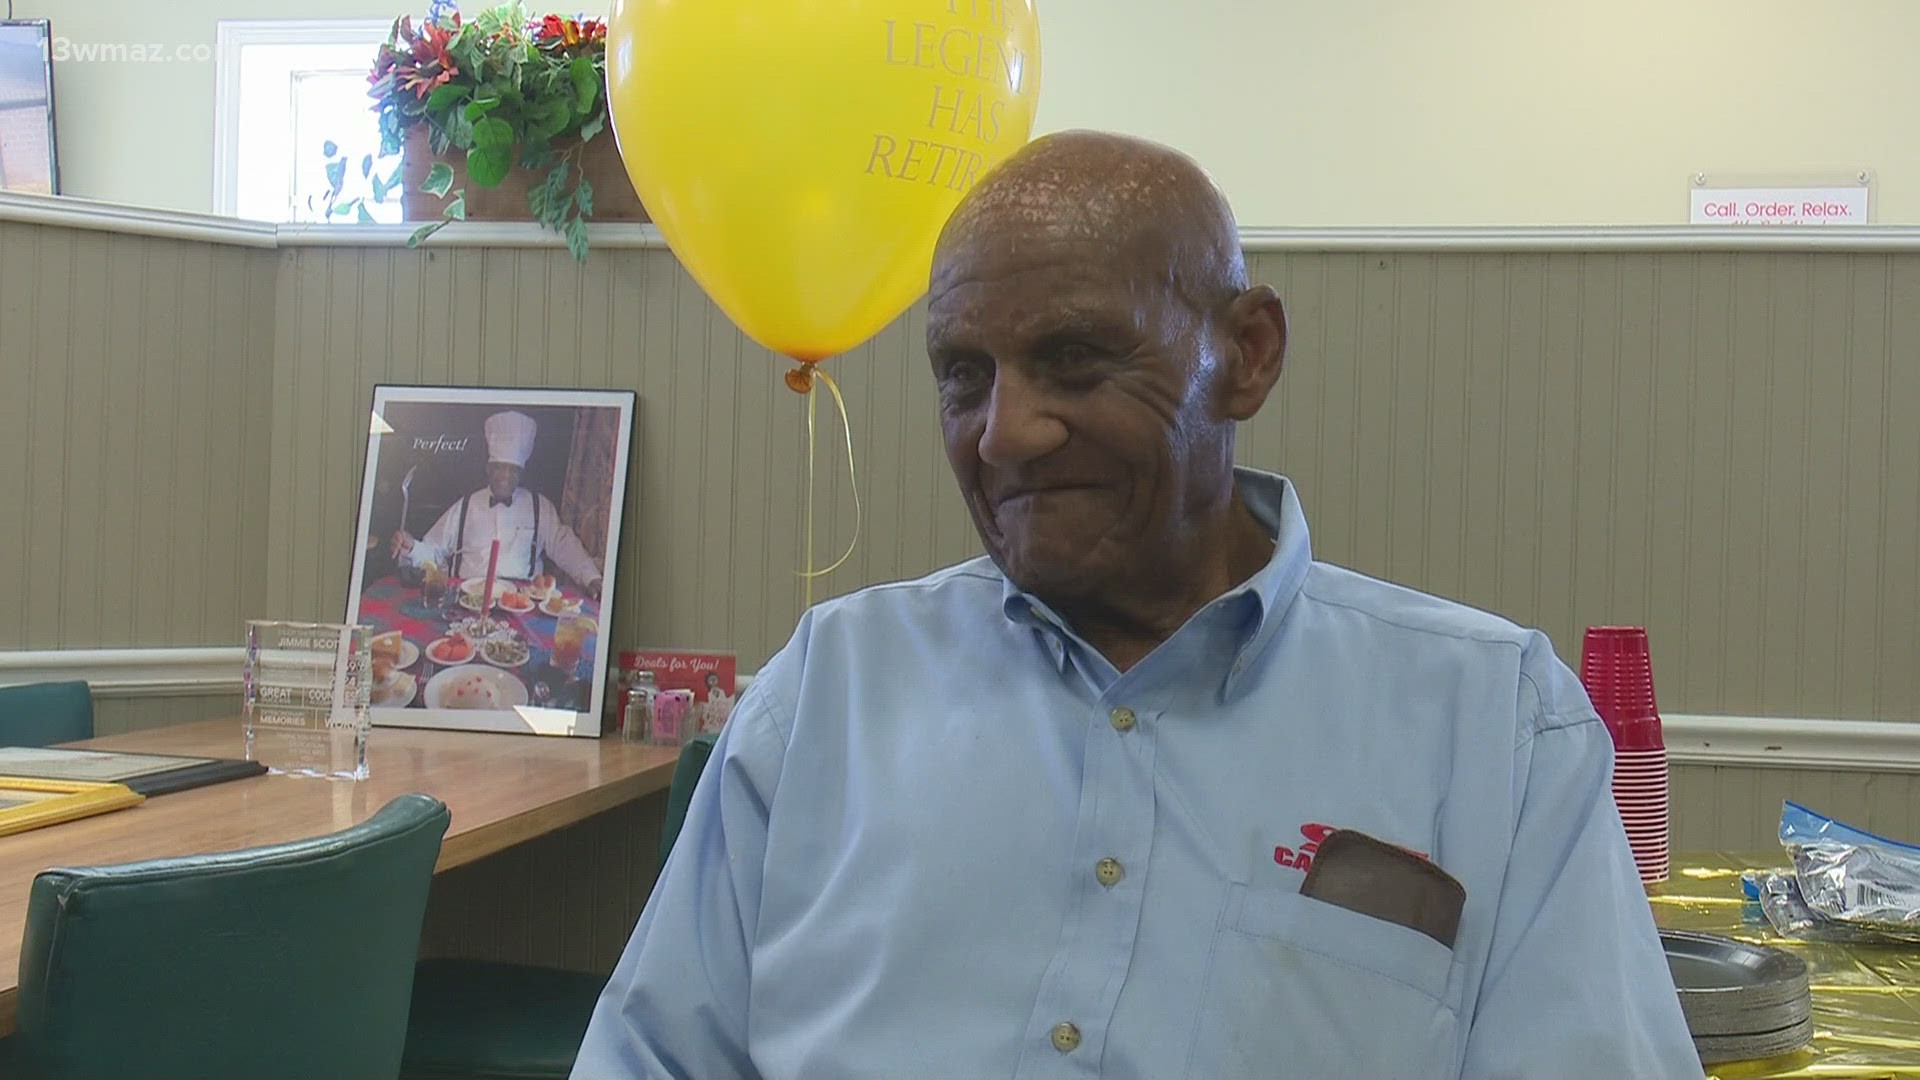 Jimmie Scott has worked at S&S Cafeteria for 65 years. Now he's hanging up his apron and retiring.